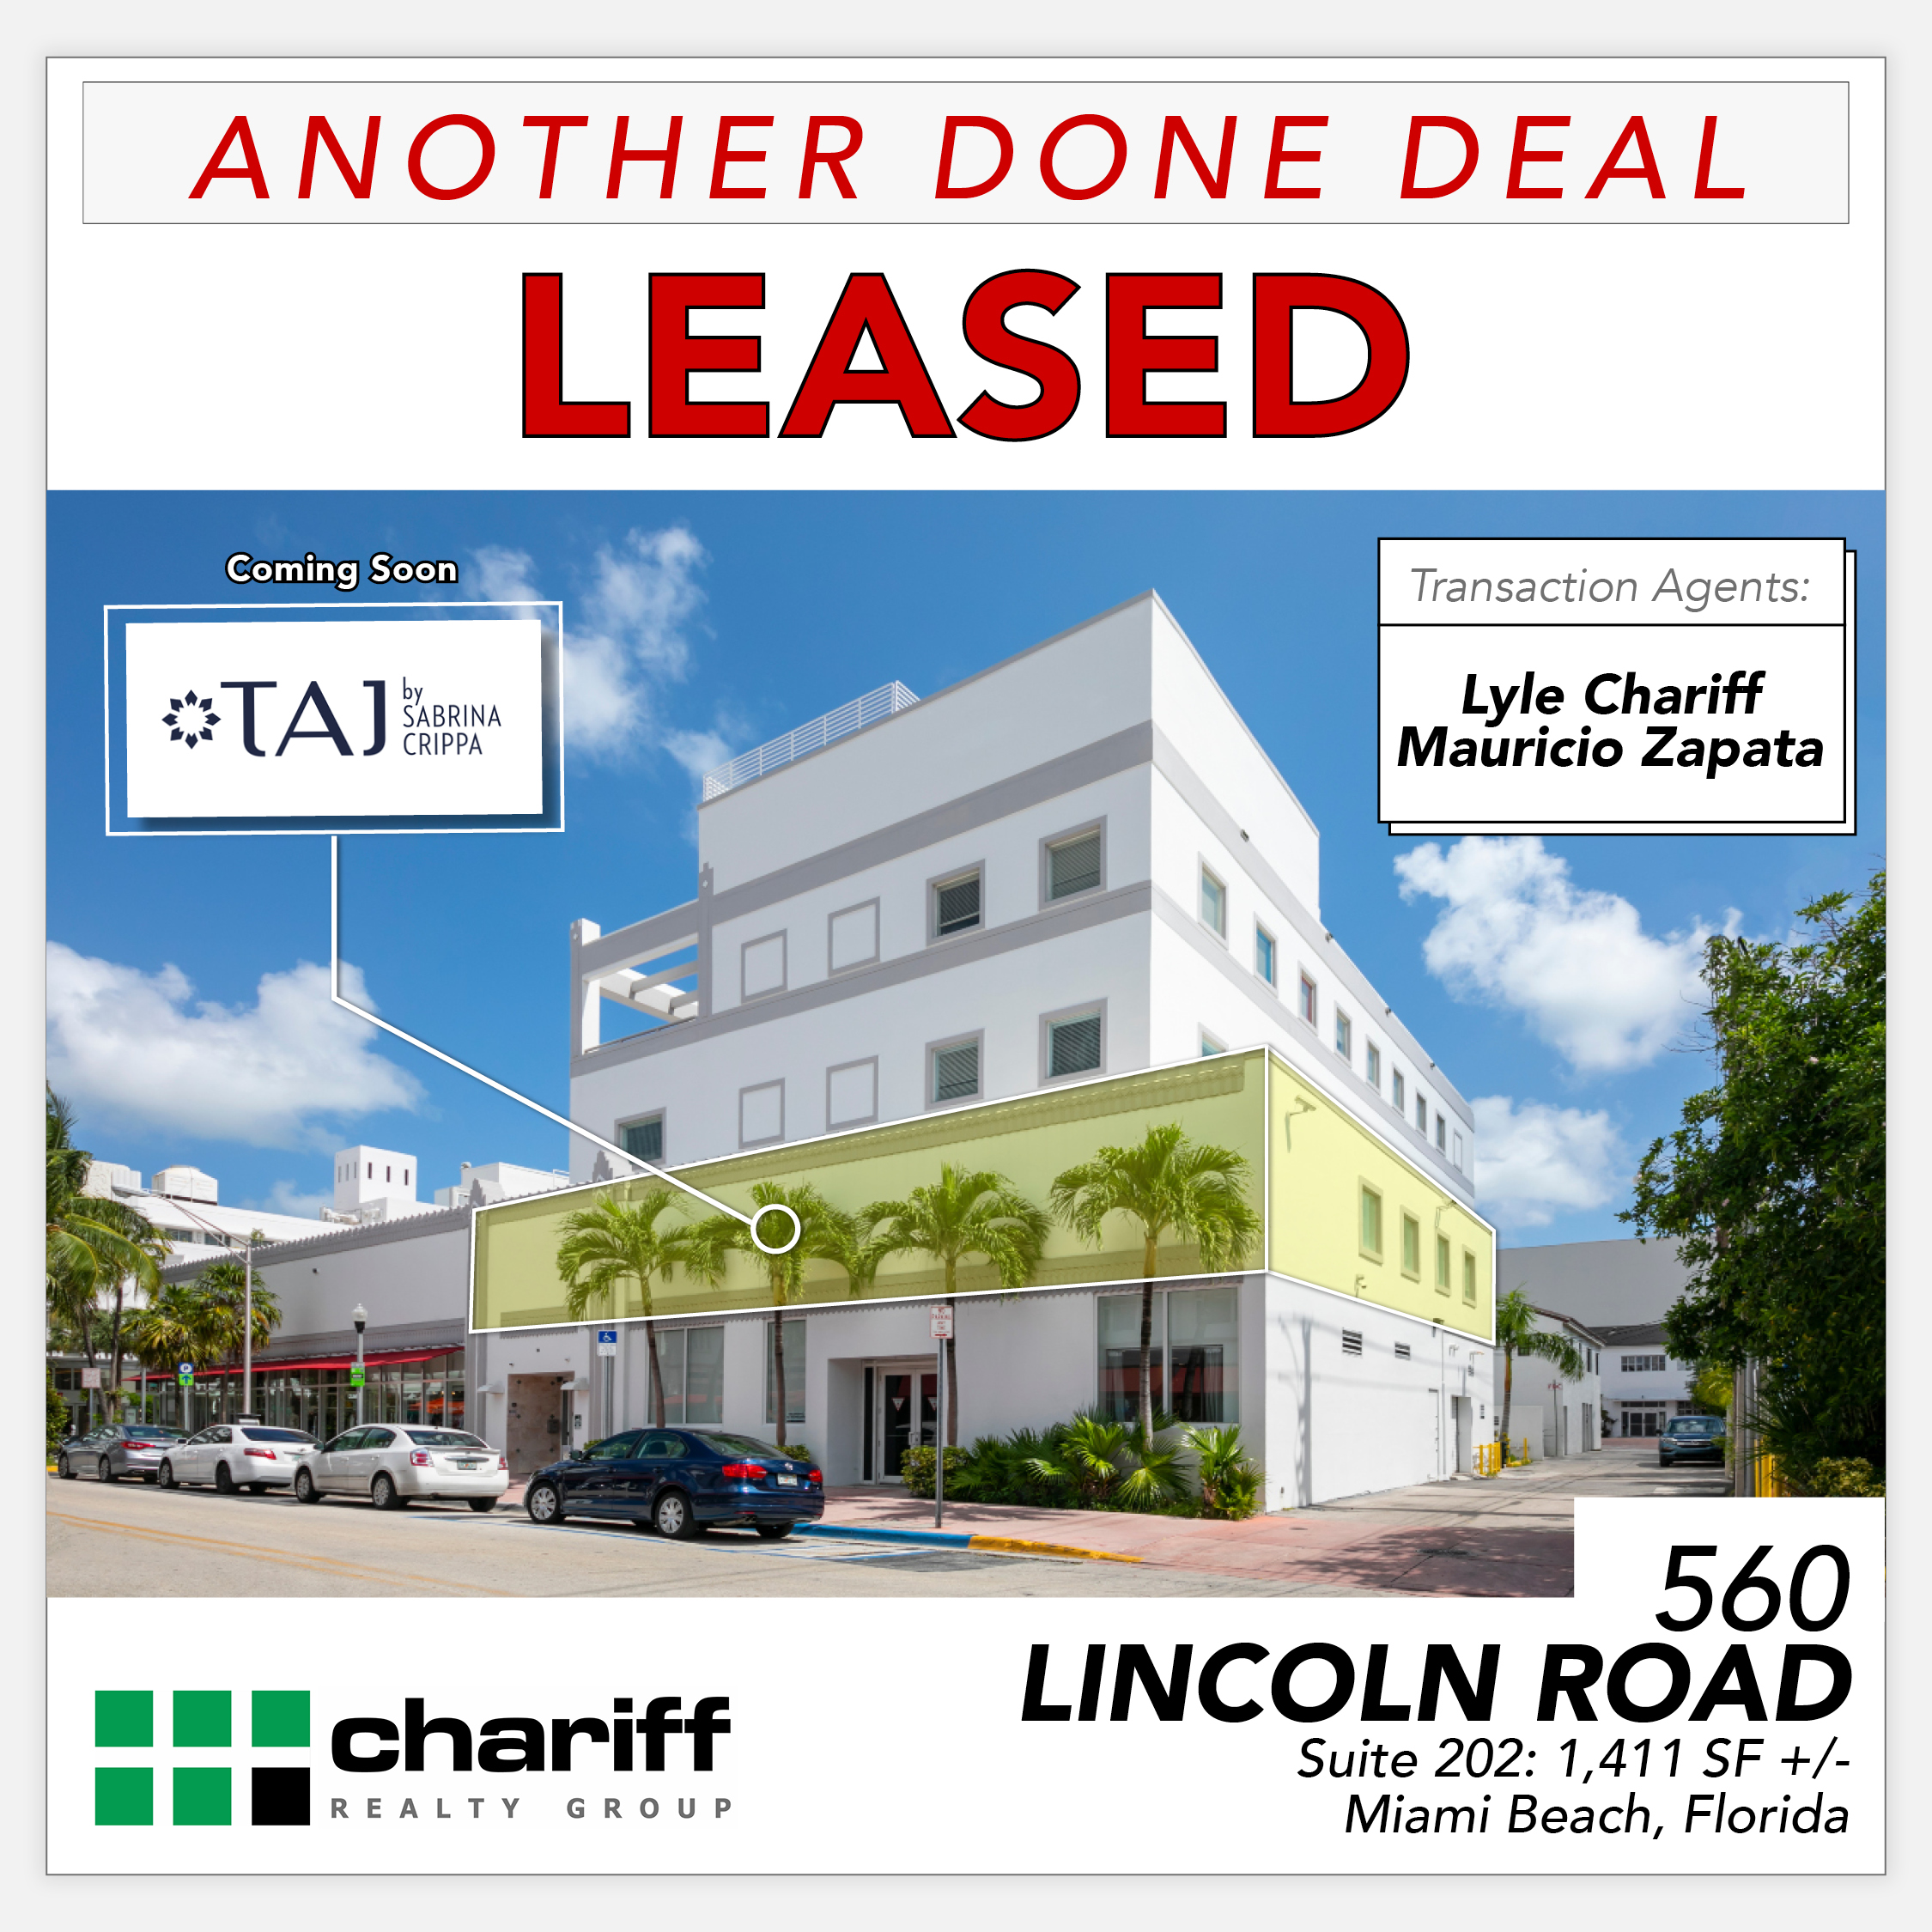 560 Lincoln Road - Another Done Deal - Leased - Lincoln Road Mall -Miami Beach -Florida-33139-Chariff Realty Group